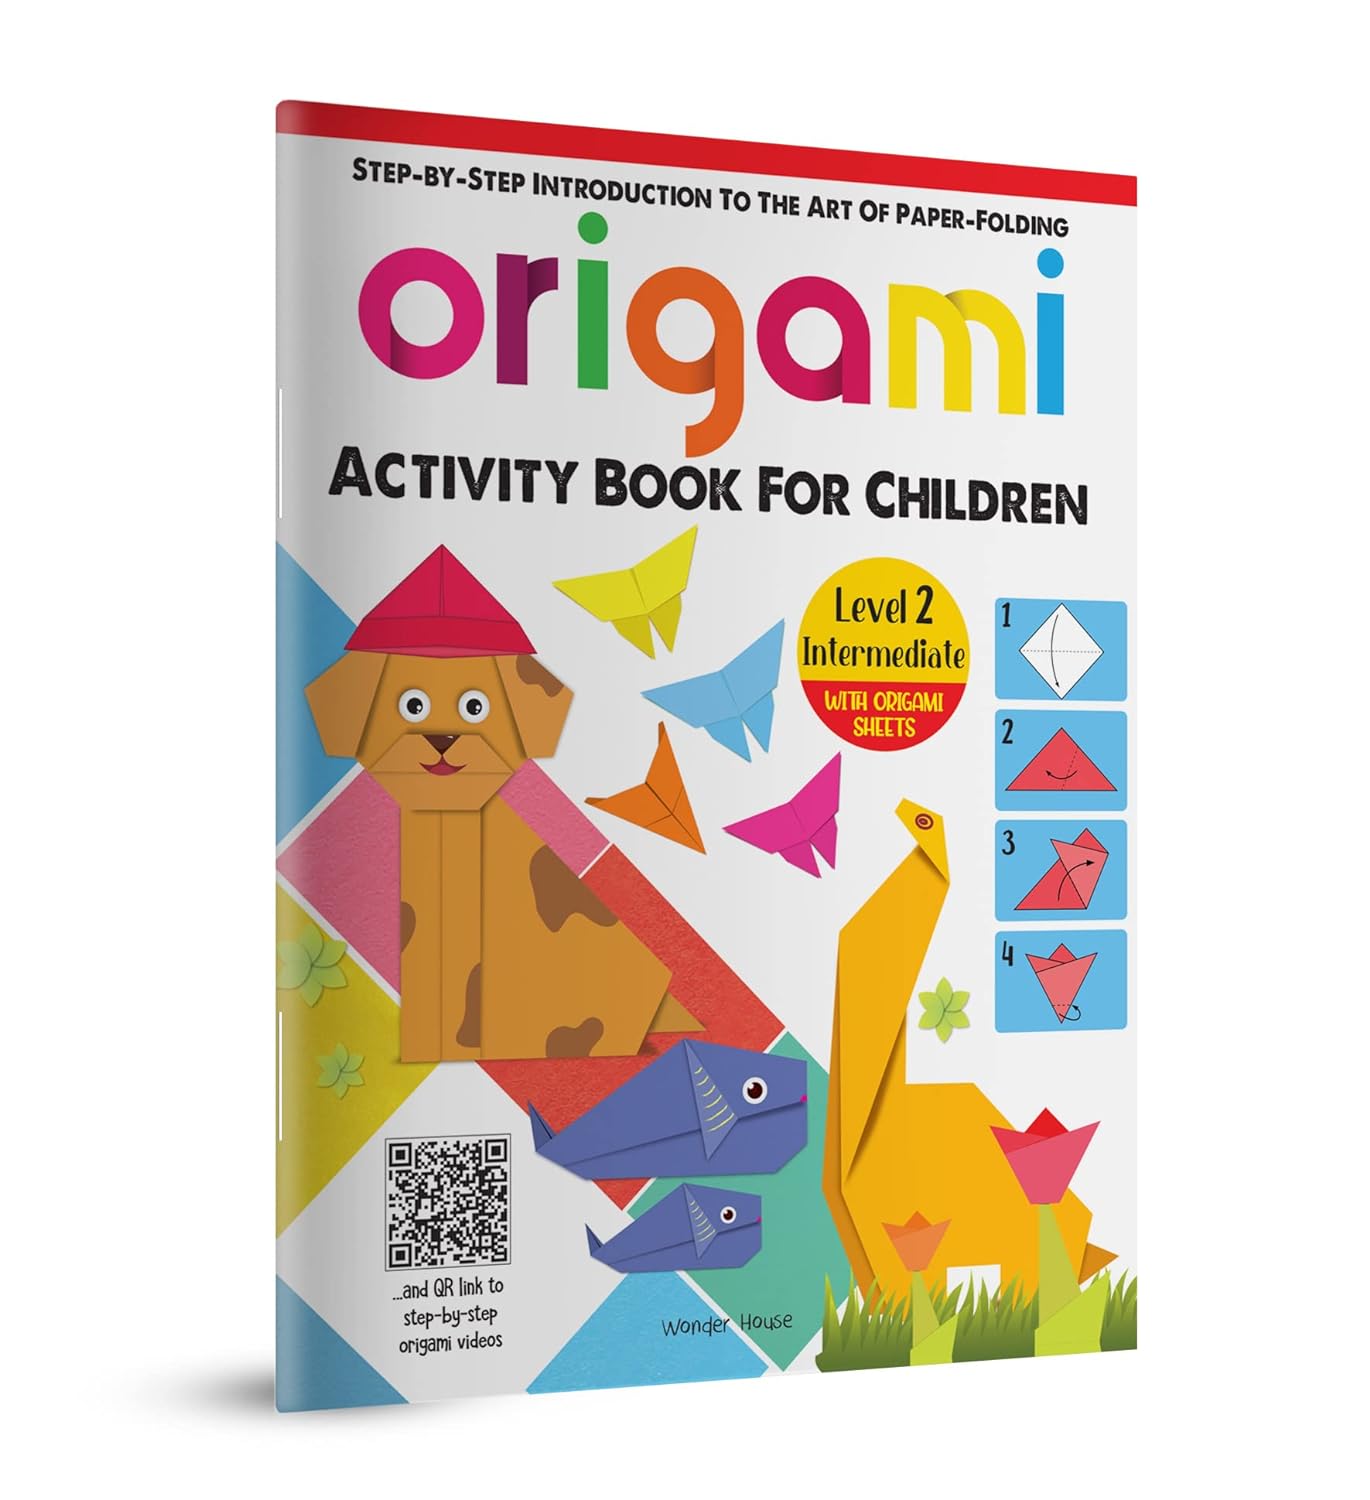 Origami - The Art of Paper-Folding - Activity Book For Children Level - 2